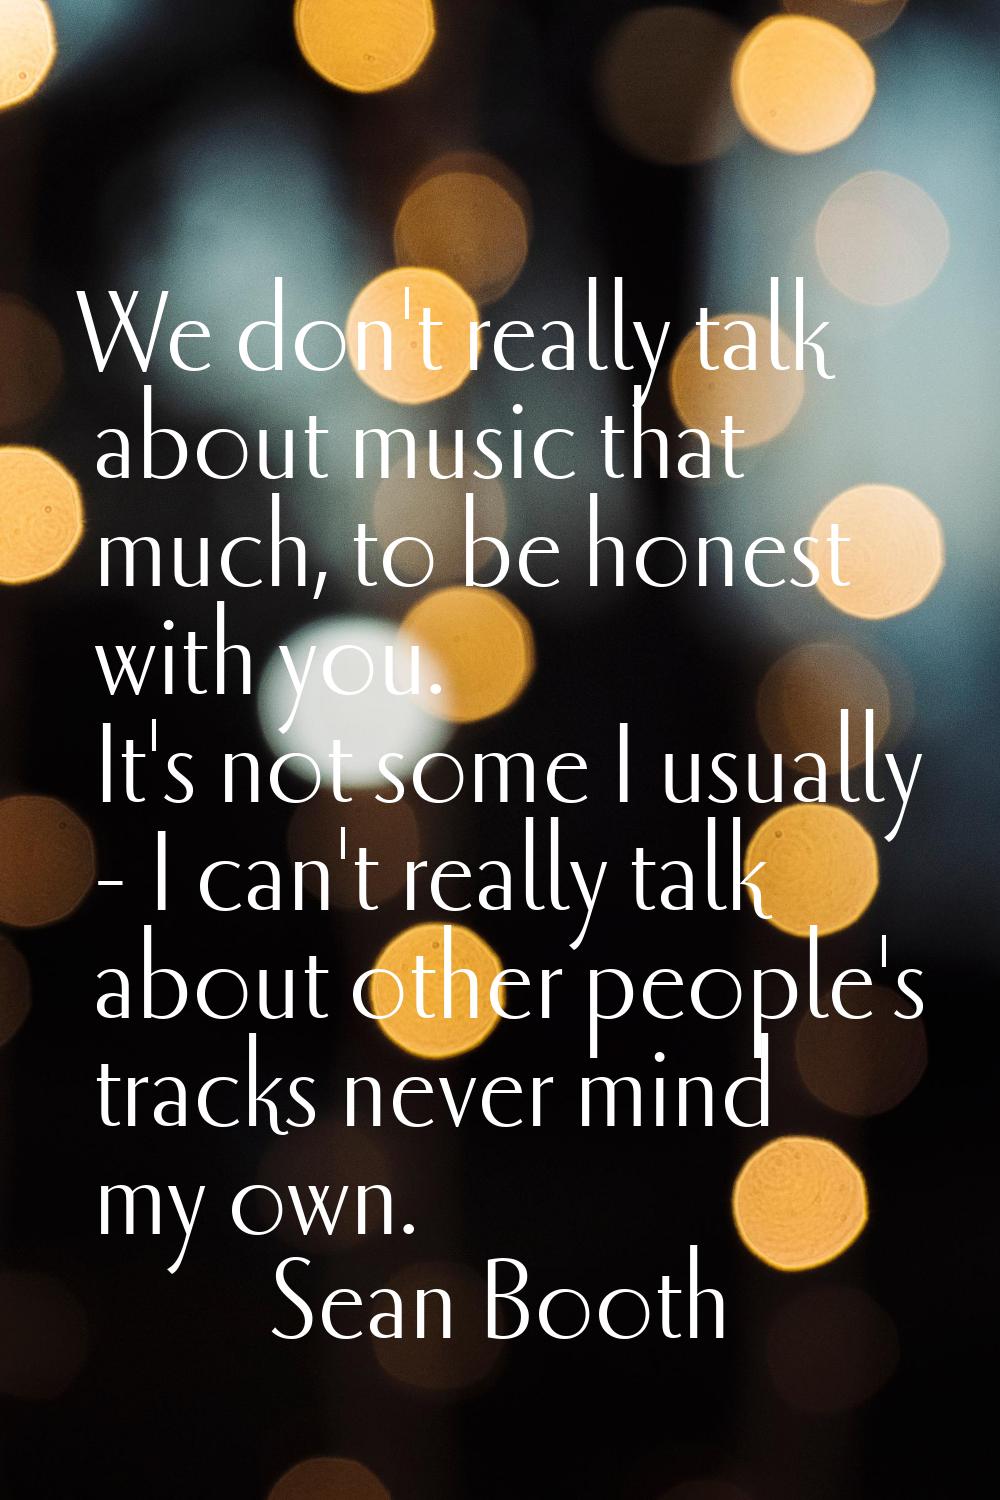 We don't really talk about music that much, to be honest with you. It's not some I usually - I can'